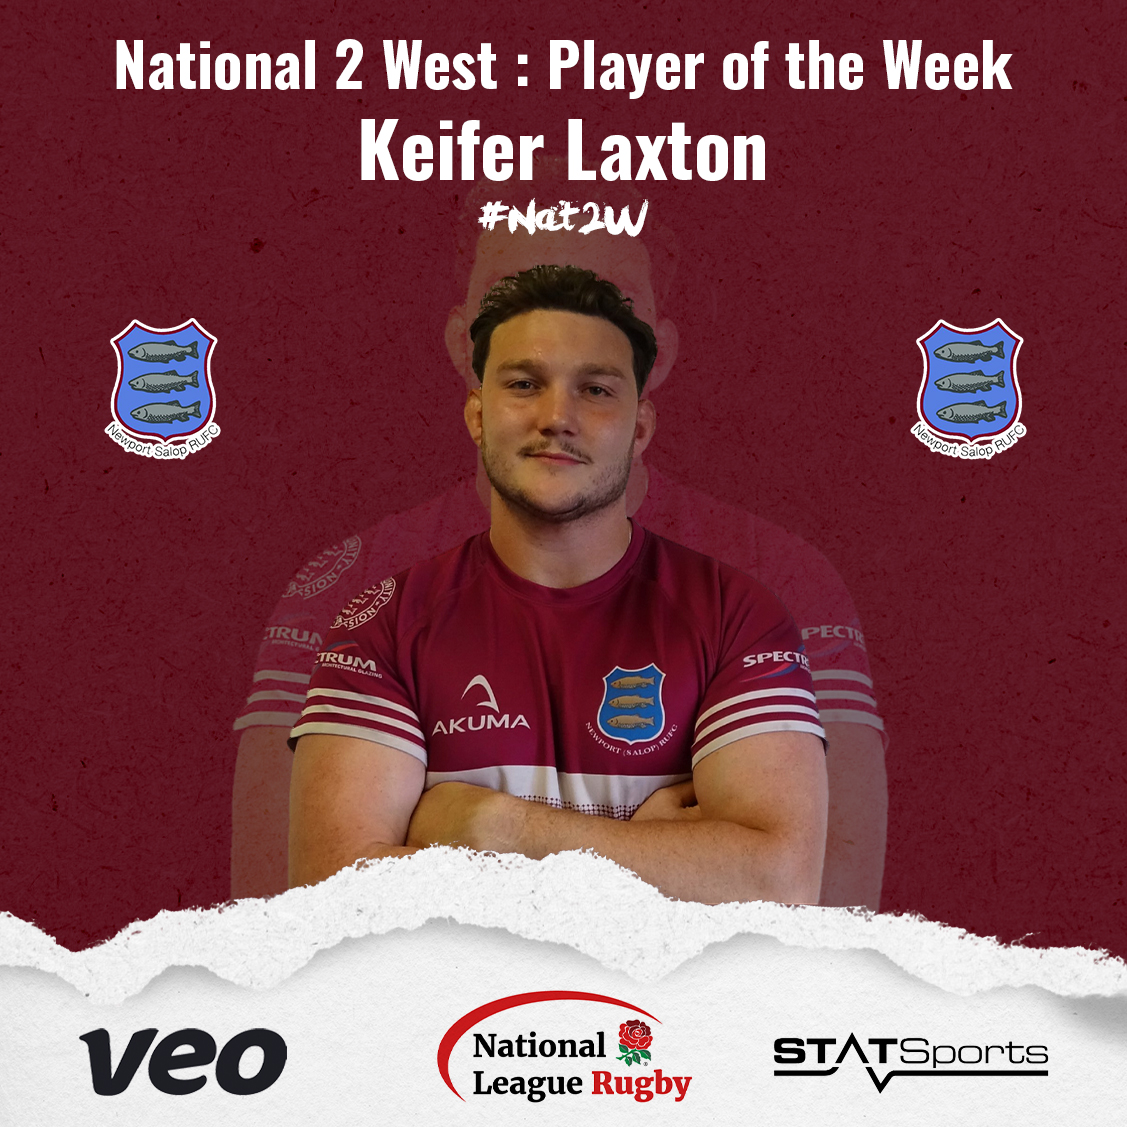 🚨 Here is this week's Player of the Week from Round 23 in National 2 West: @NewportSalopRFC's Keifer Laxton #Nat2W